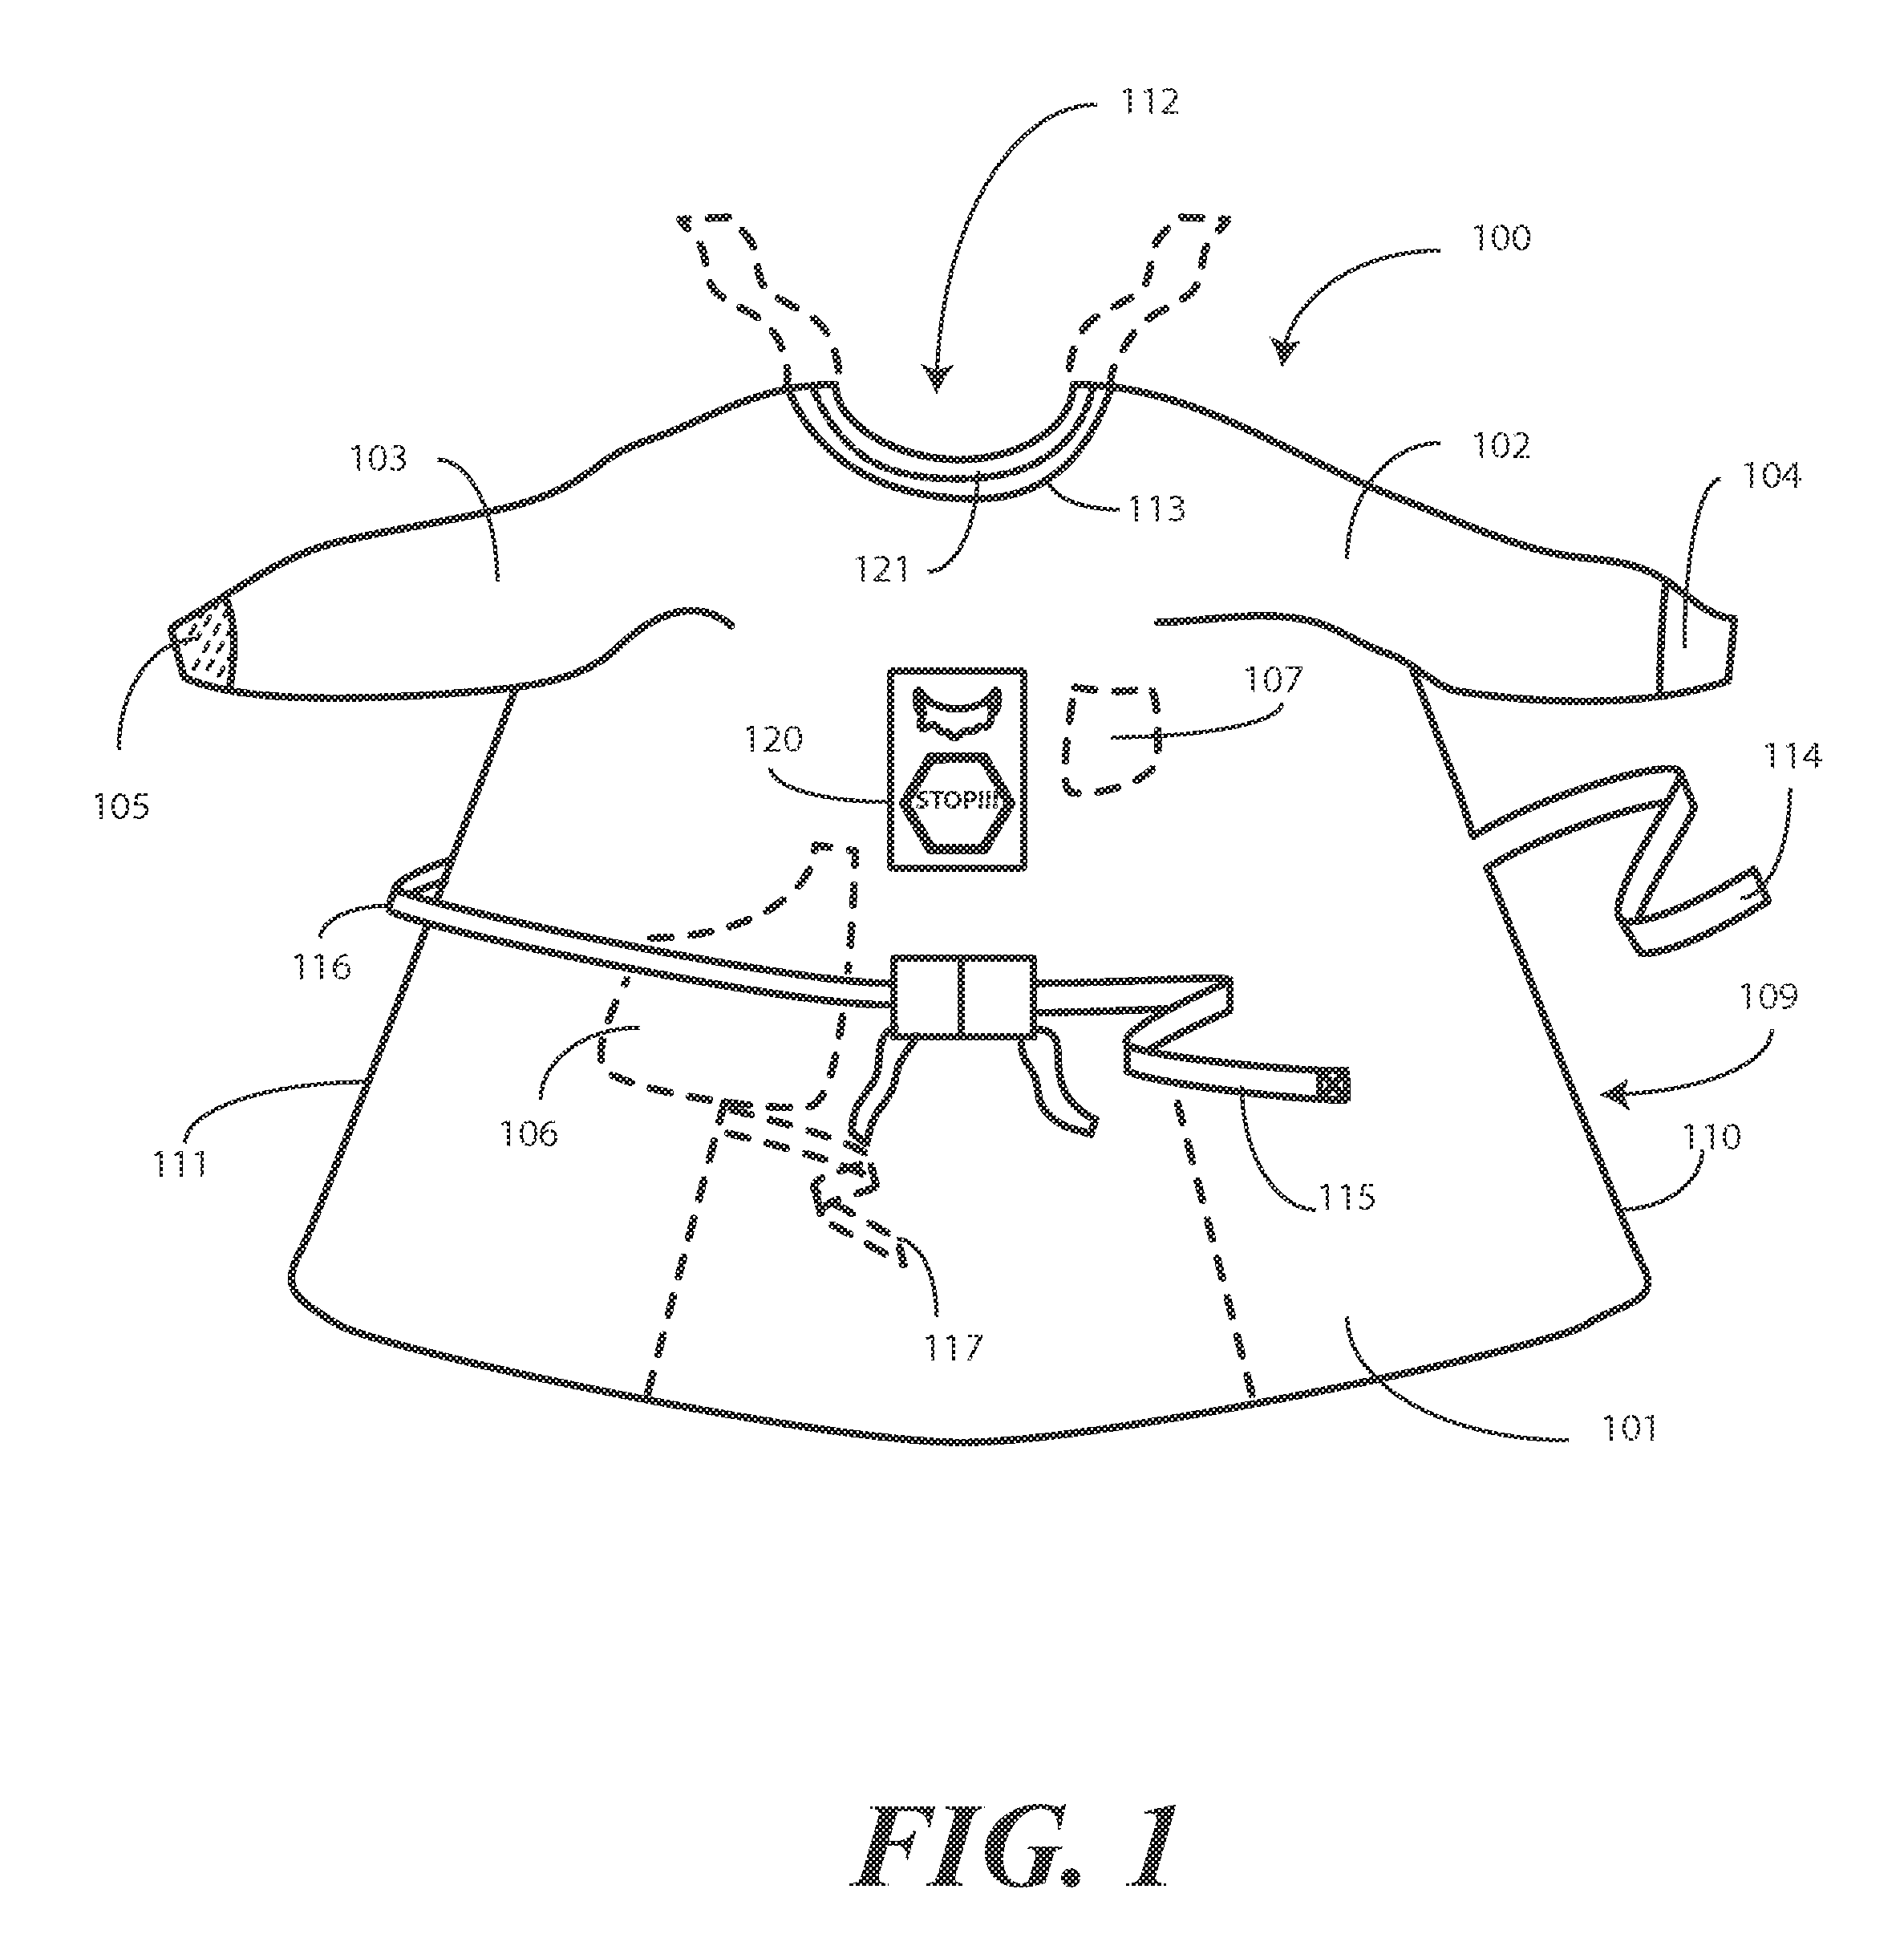 Surgical Gown Configured for Prevention of Improper Medical Procedures